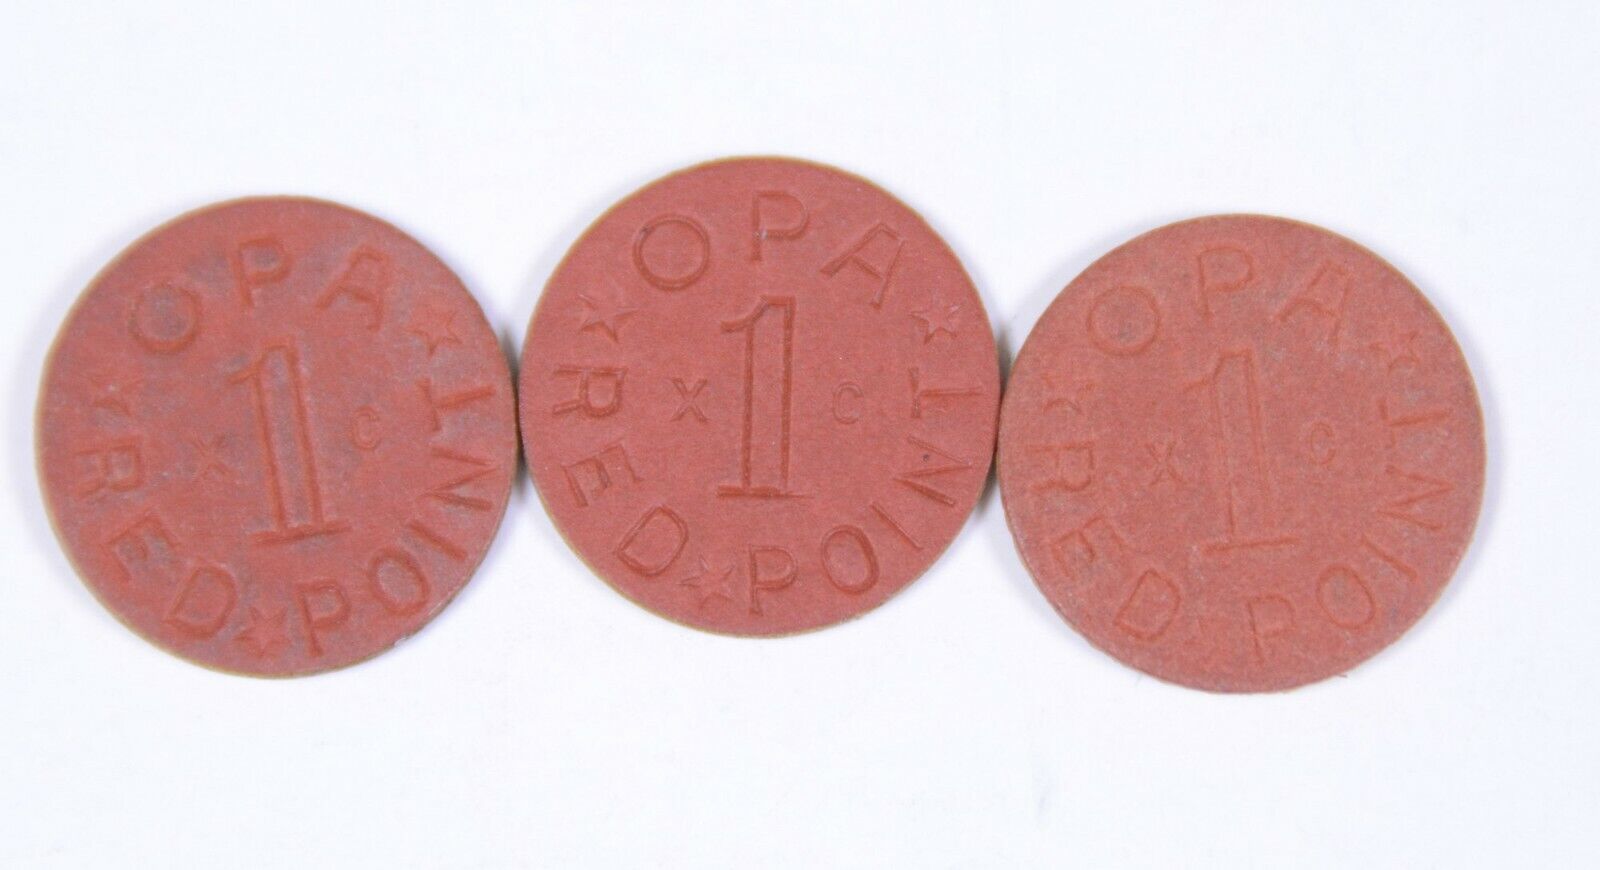 Lot of (3) Vintage WWII ERA  Red OPA Tax Tokens Marked XC  issued 1942 to 1945  Без бренда